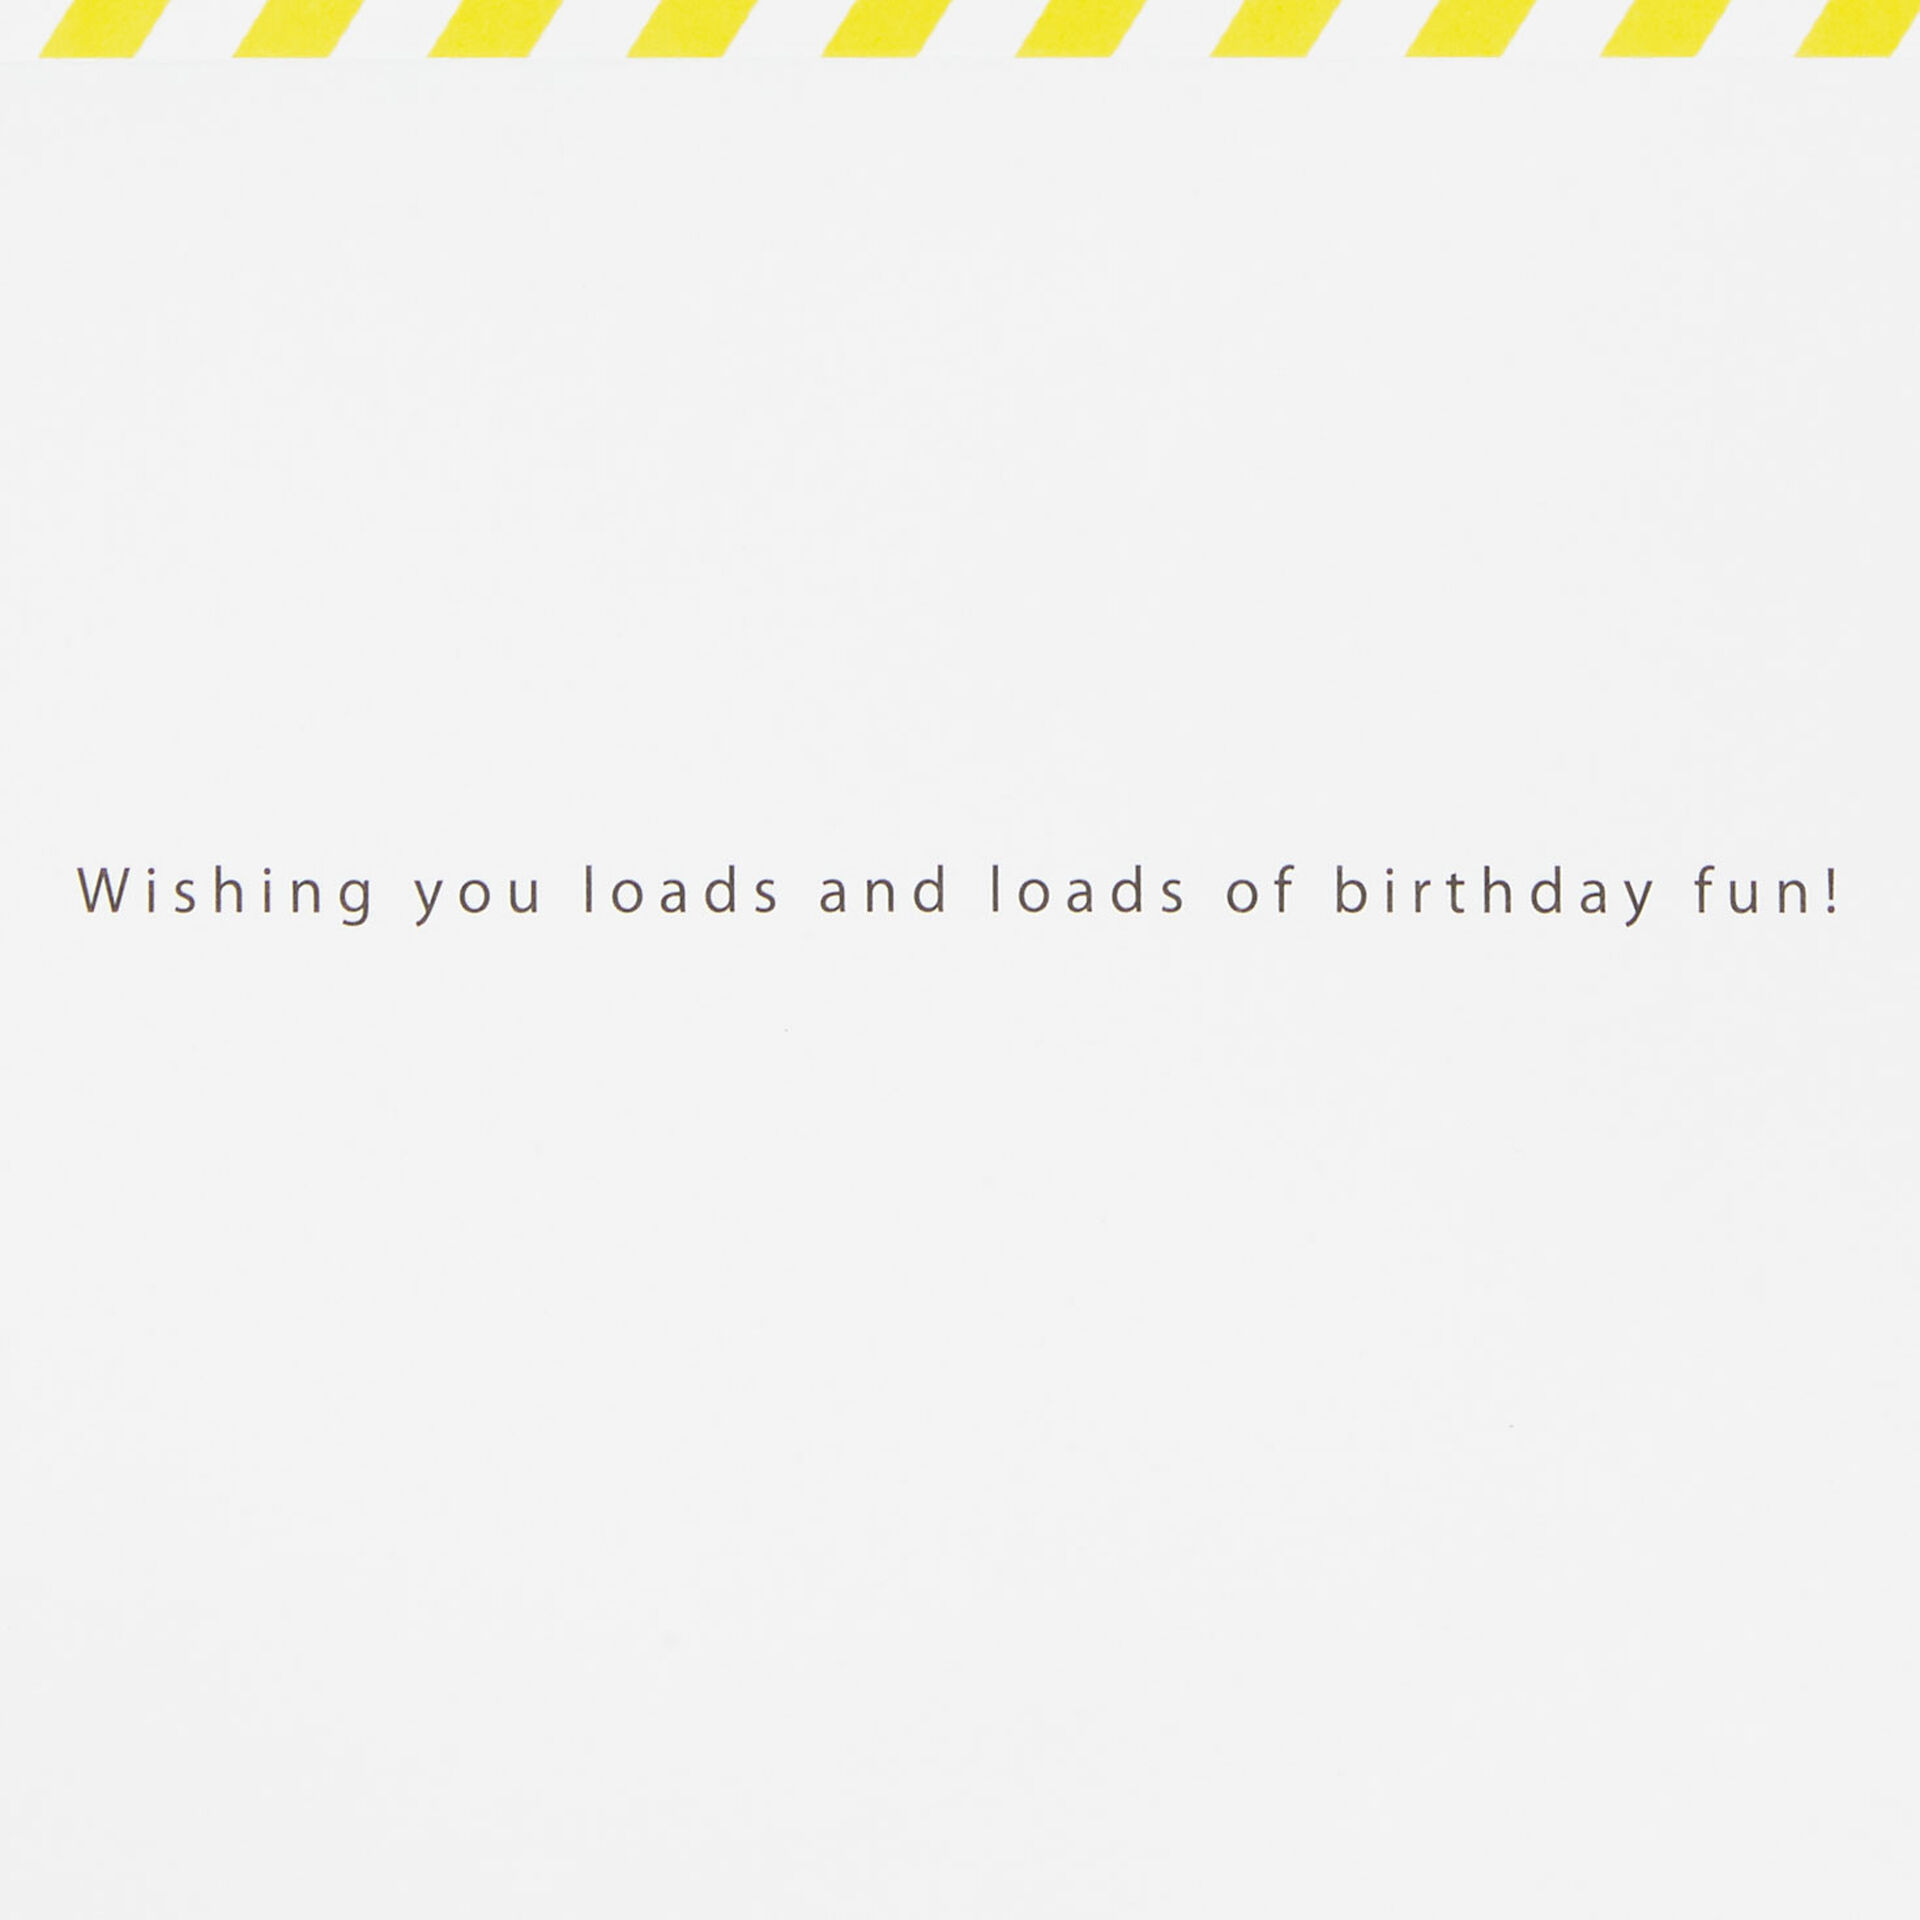 Loads-of-Fun-Birthday-Card-for-Kids_599LAD9864_02